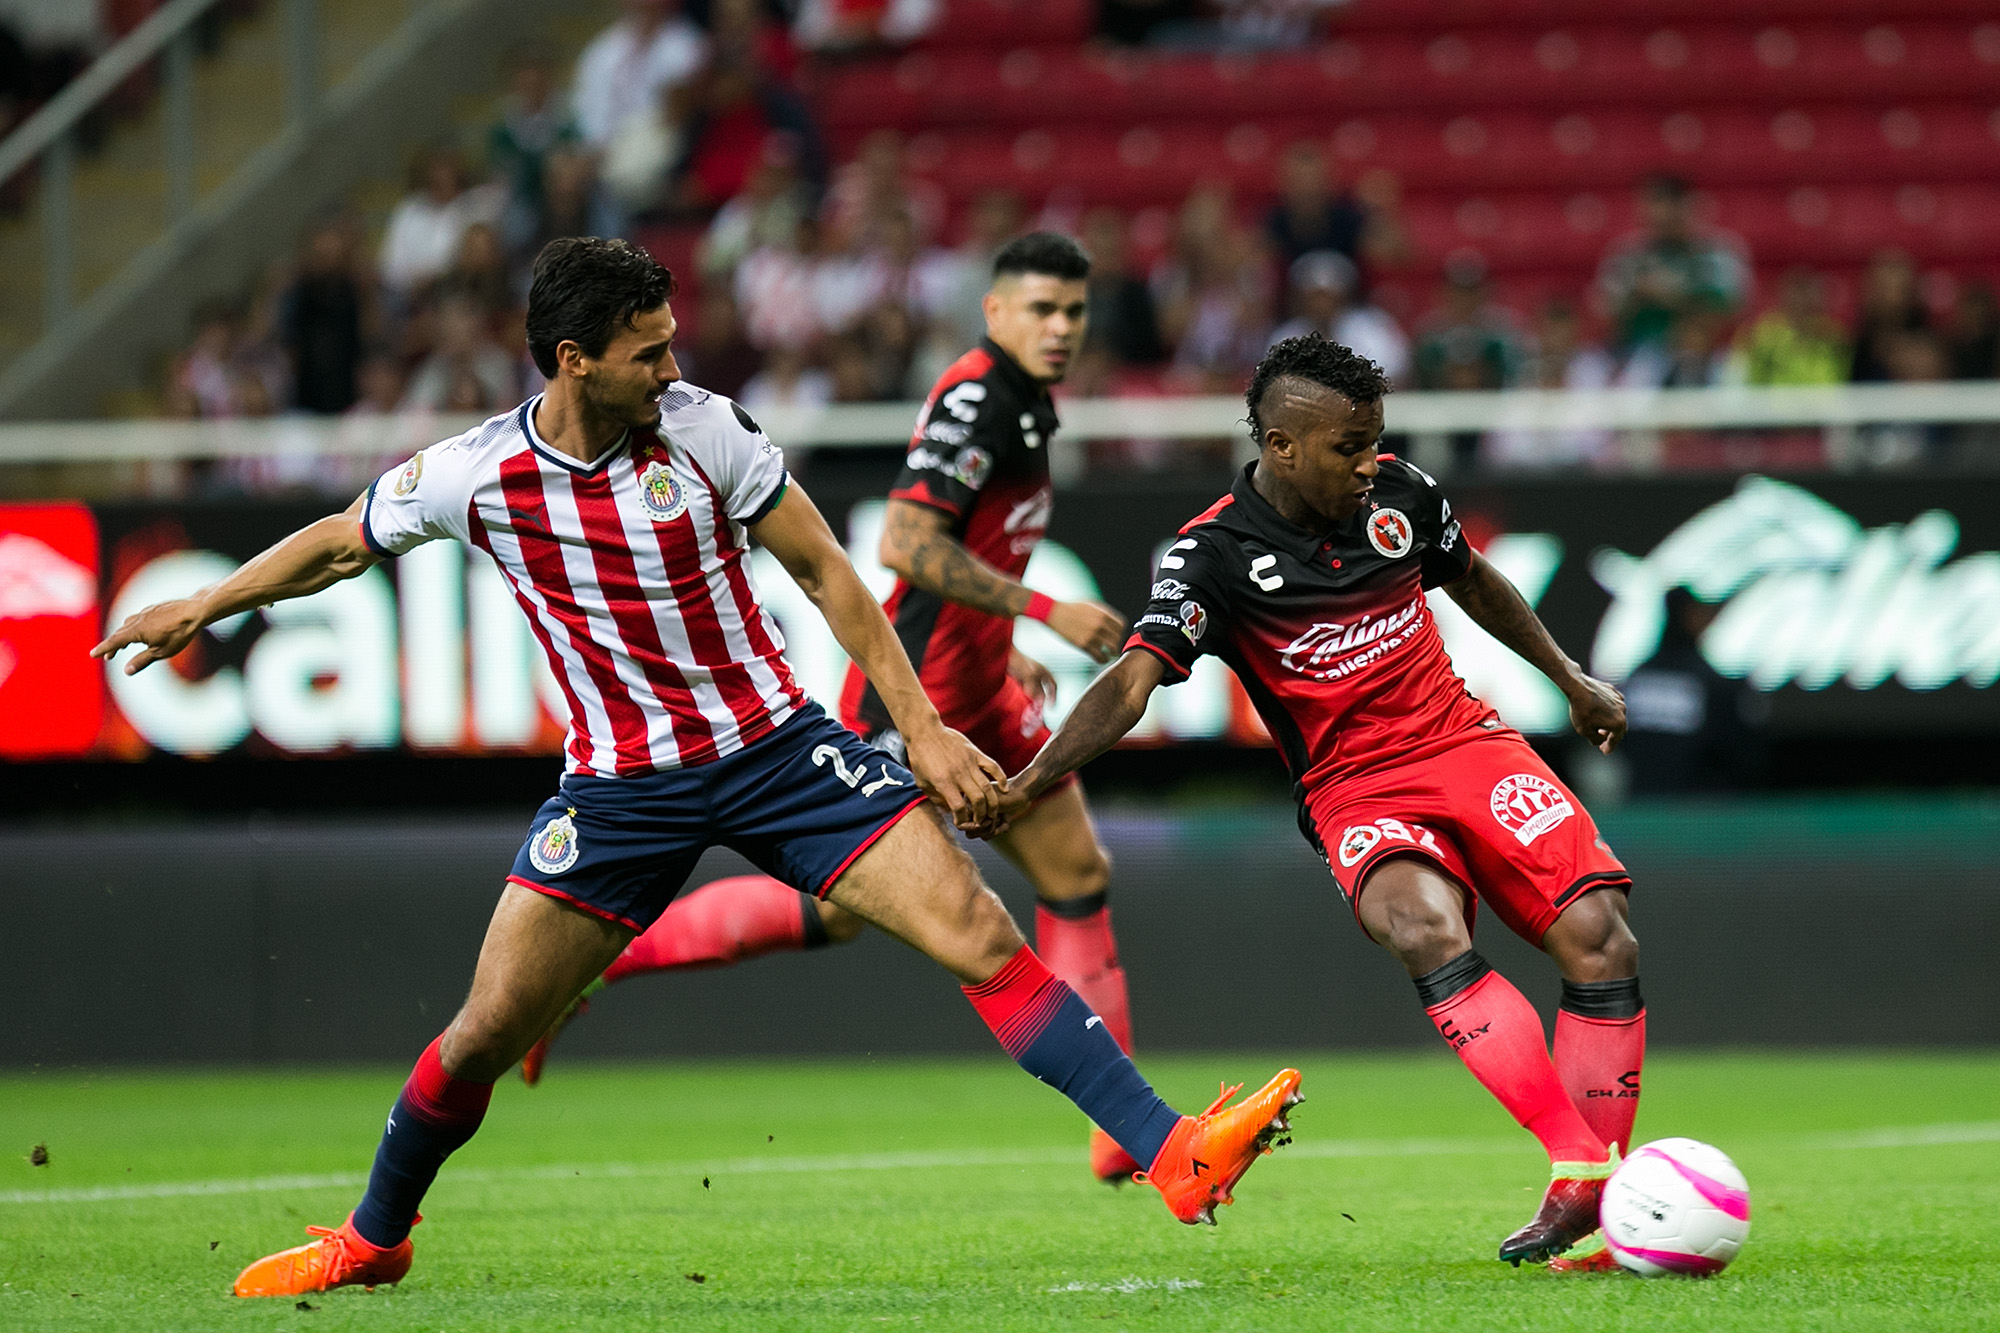 Chivas 3-1 Club Tijuana: A spot in the playoffs is quickly slipping away from Xolos